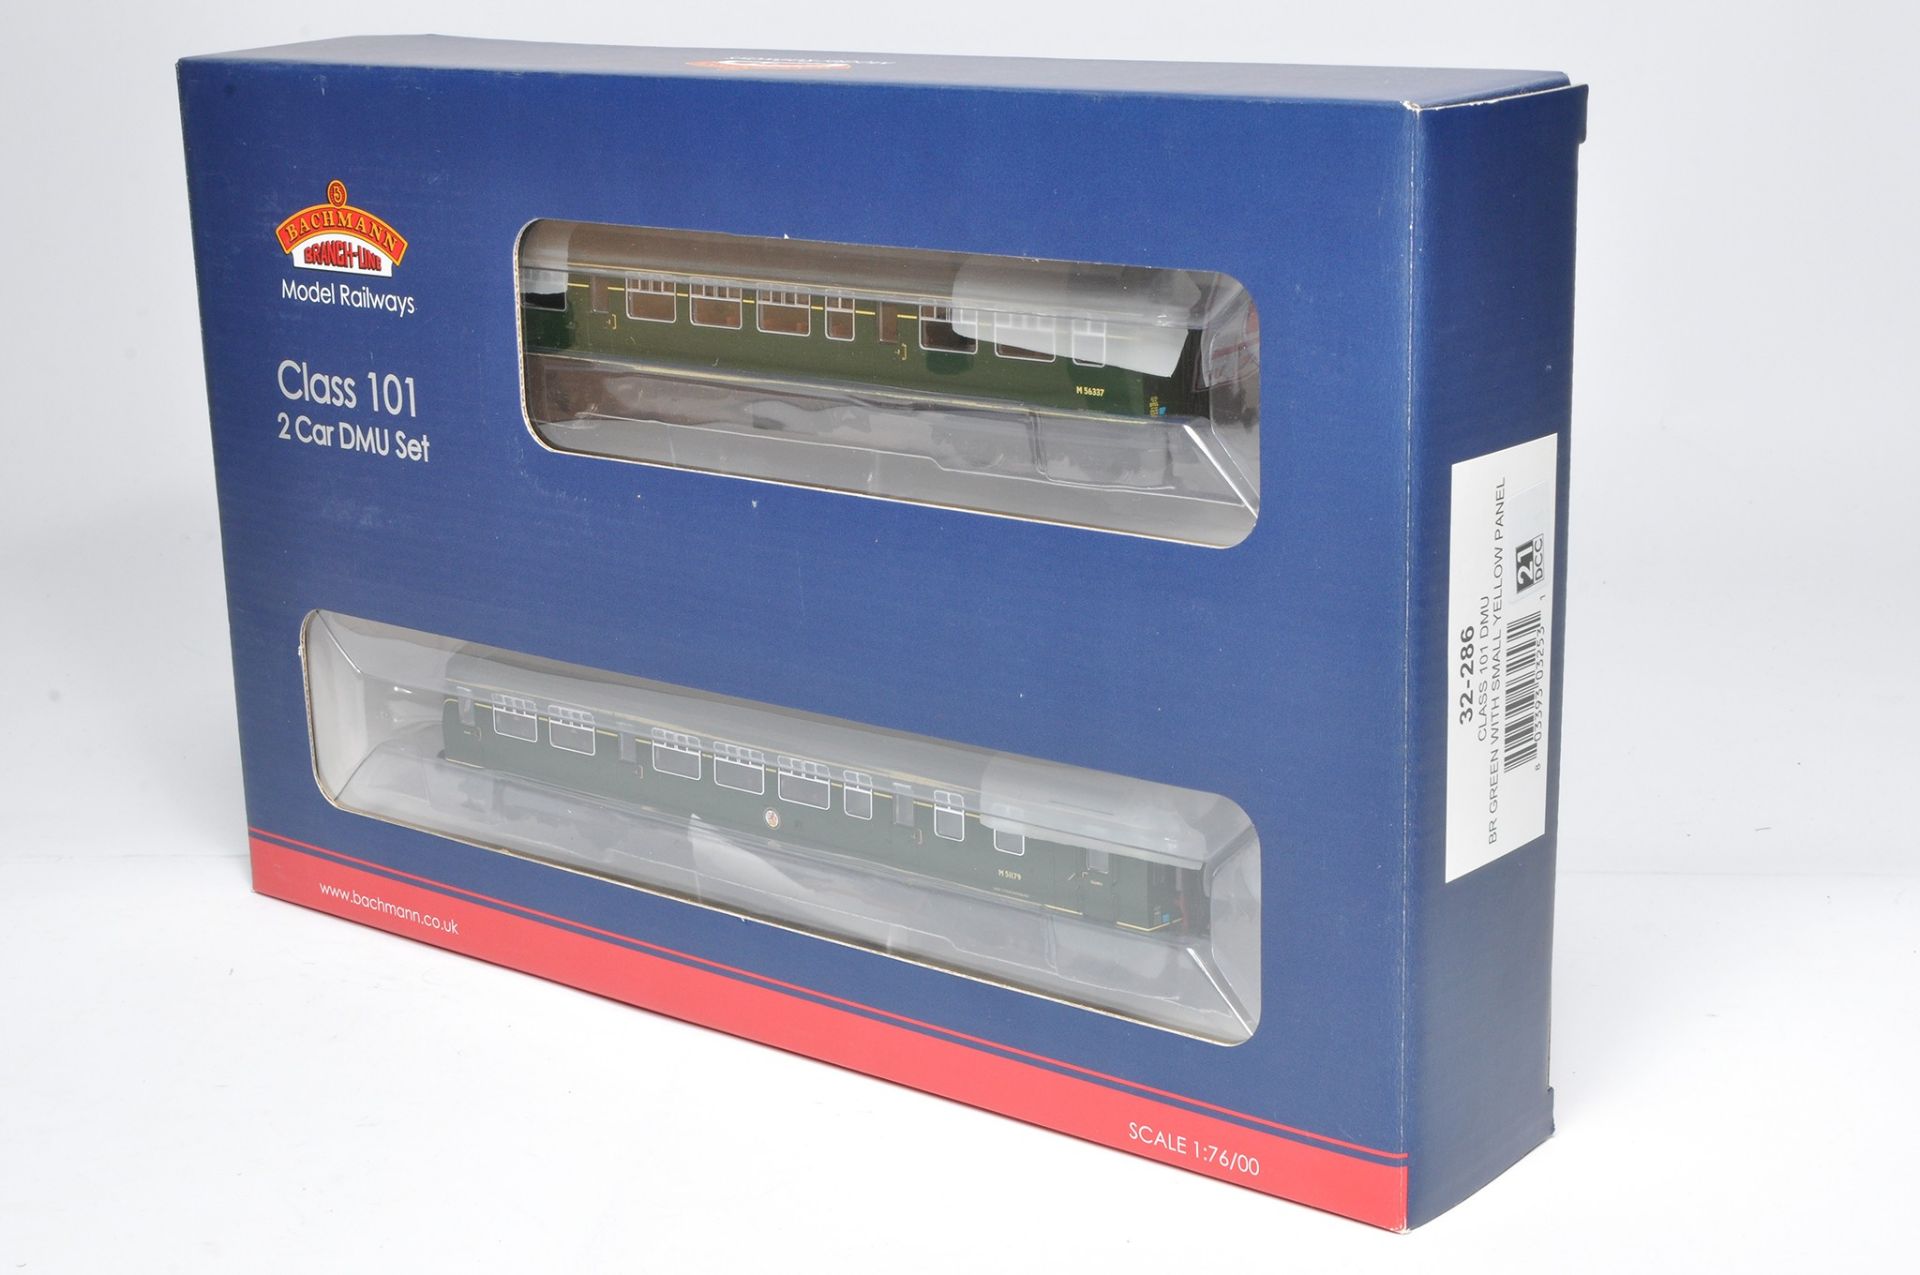 Bachmann Model Railway comprising locomotive issue No. 32-286 Class 101 DMU Set. Looks to be without